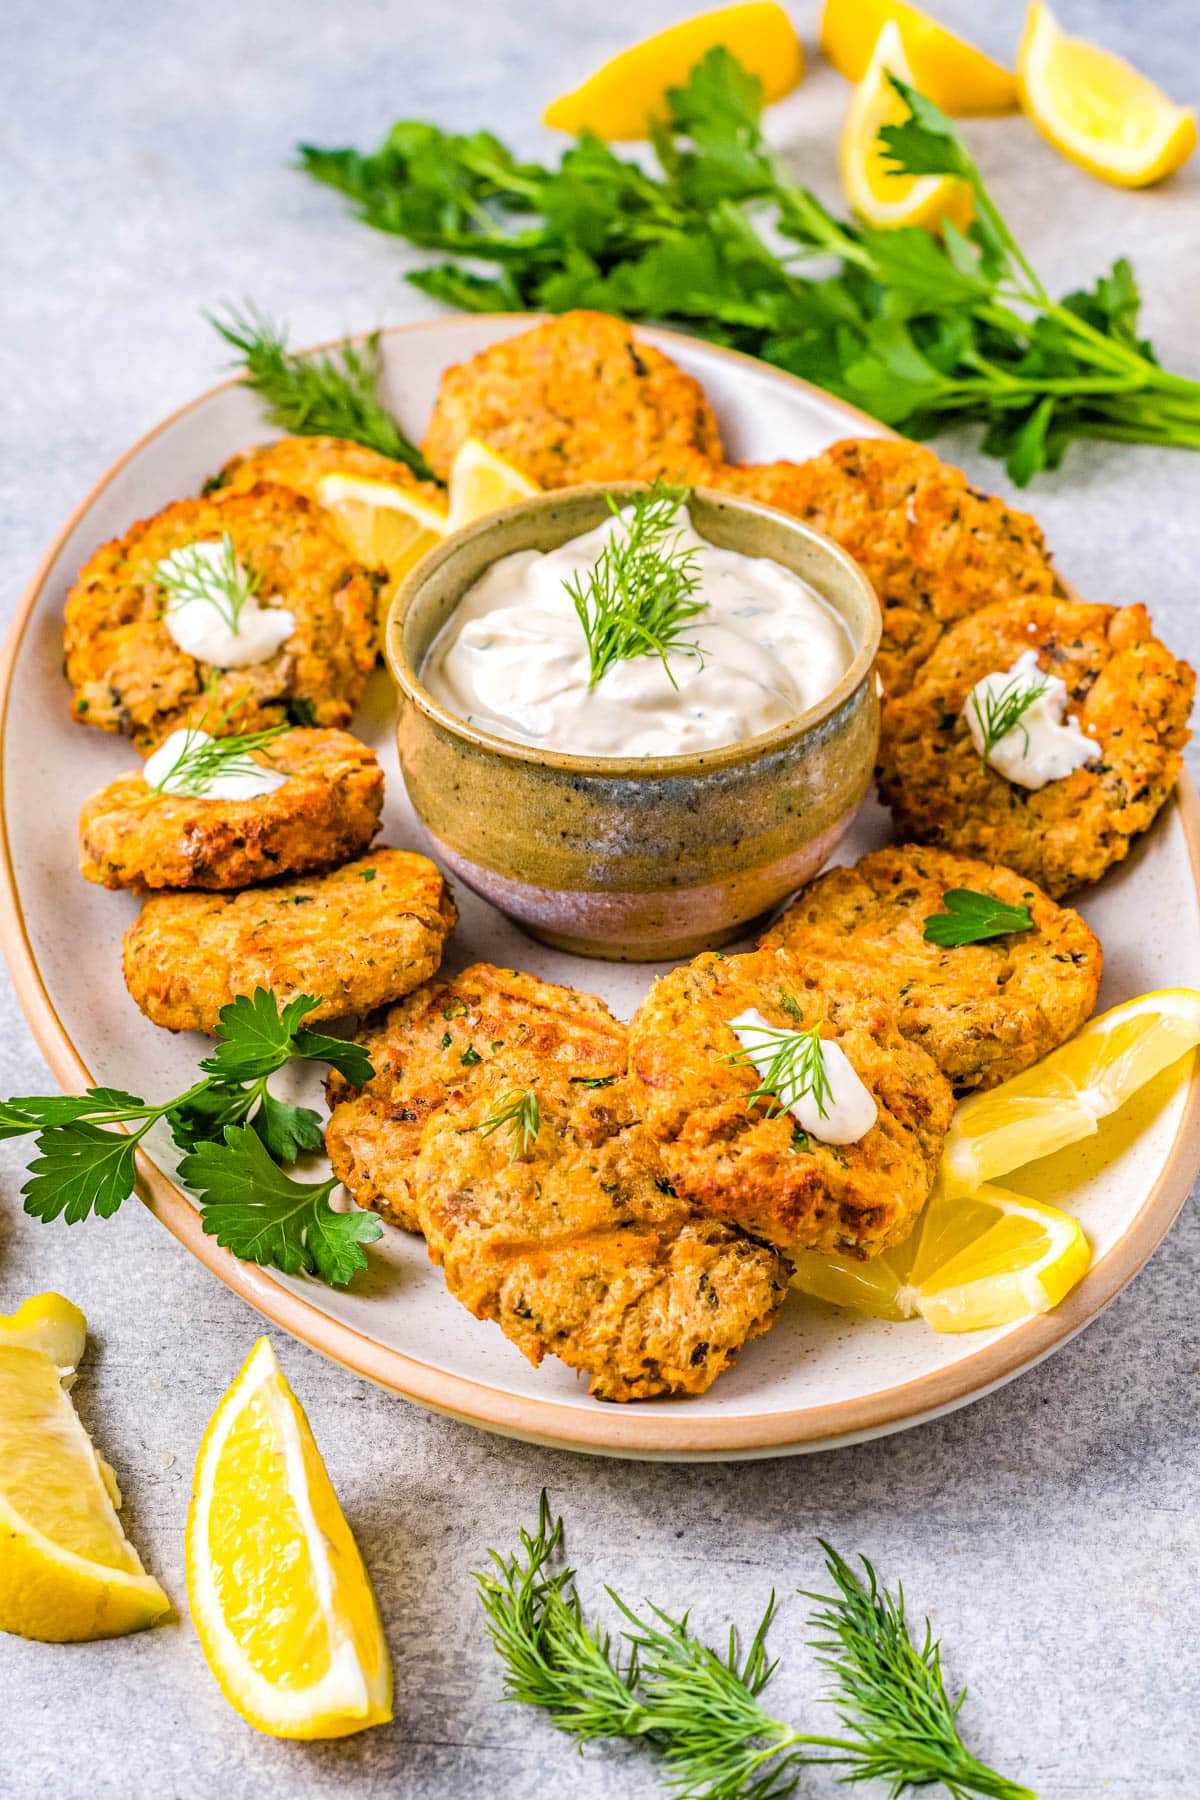 The Air Fryer Salmon Patties on a platter with dill dipping sauce and lemon wedges.